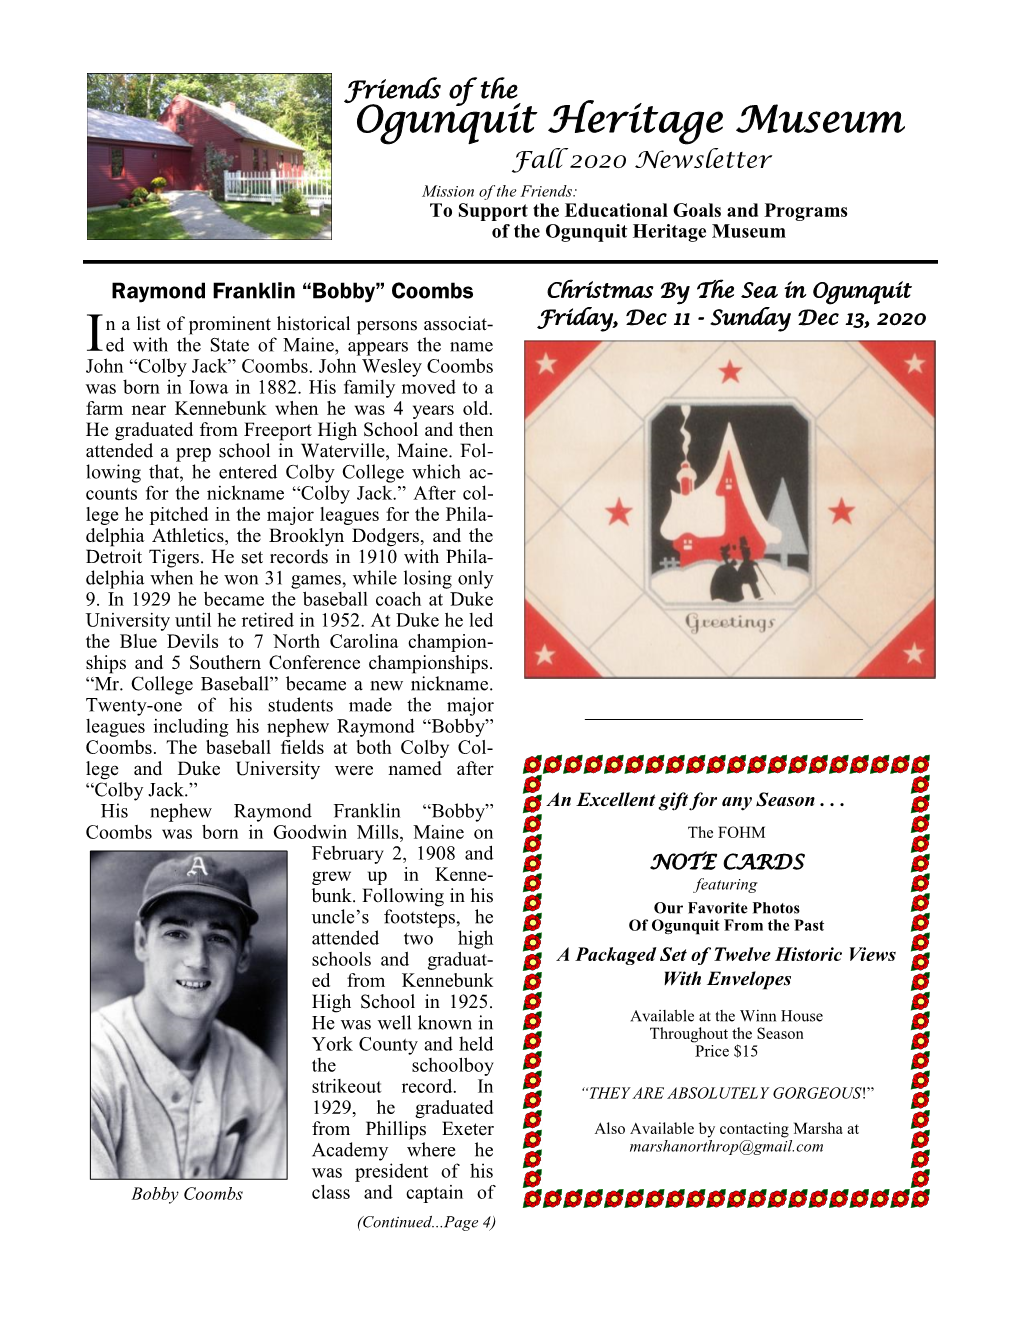 Fall 2020 Newsletter Mission of the Friends: to Support the Educational Goals and Programs of the Ogunquit Heritage Museum